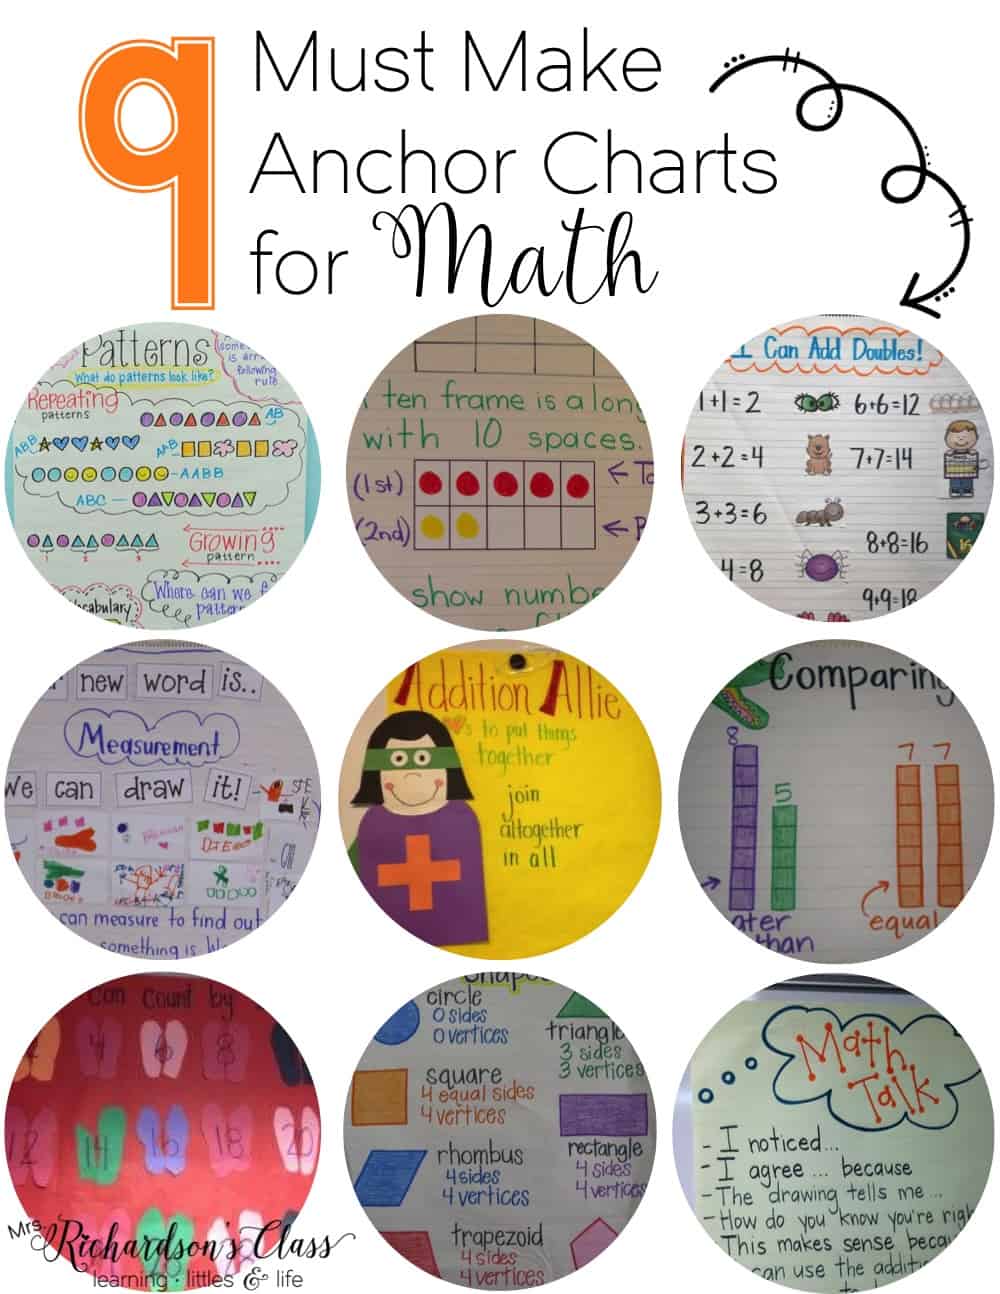 Mathematical Charts For Class 7